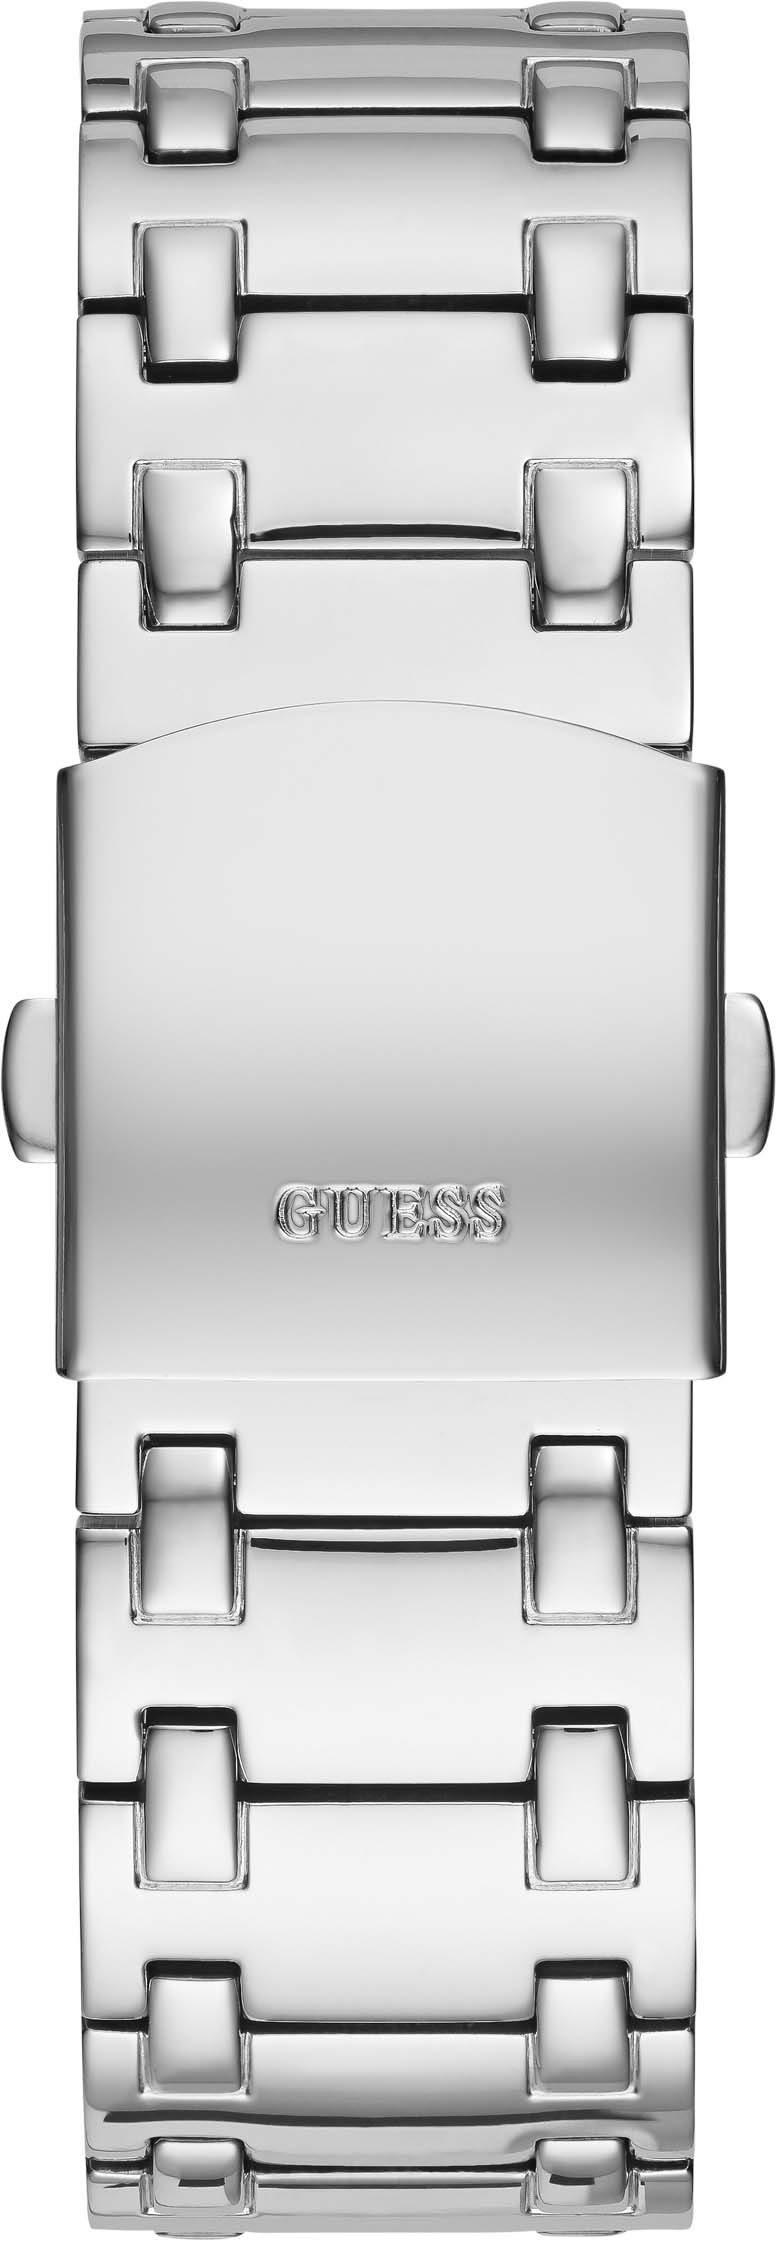 Guess Multifunktionsuhr GW0419G1